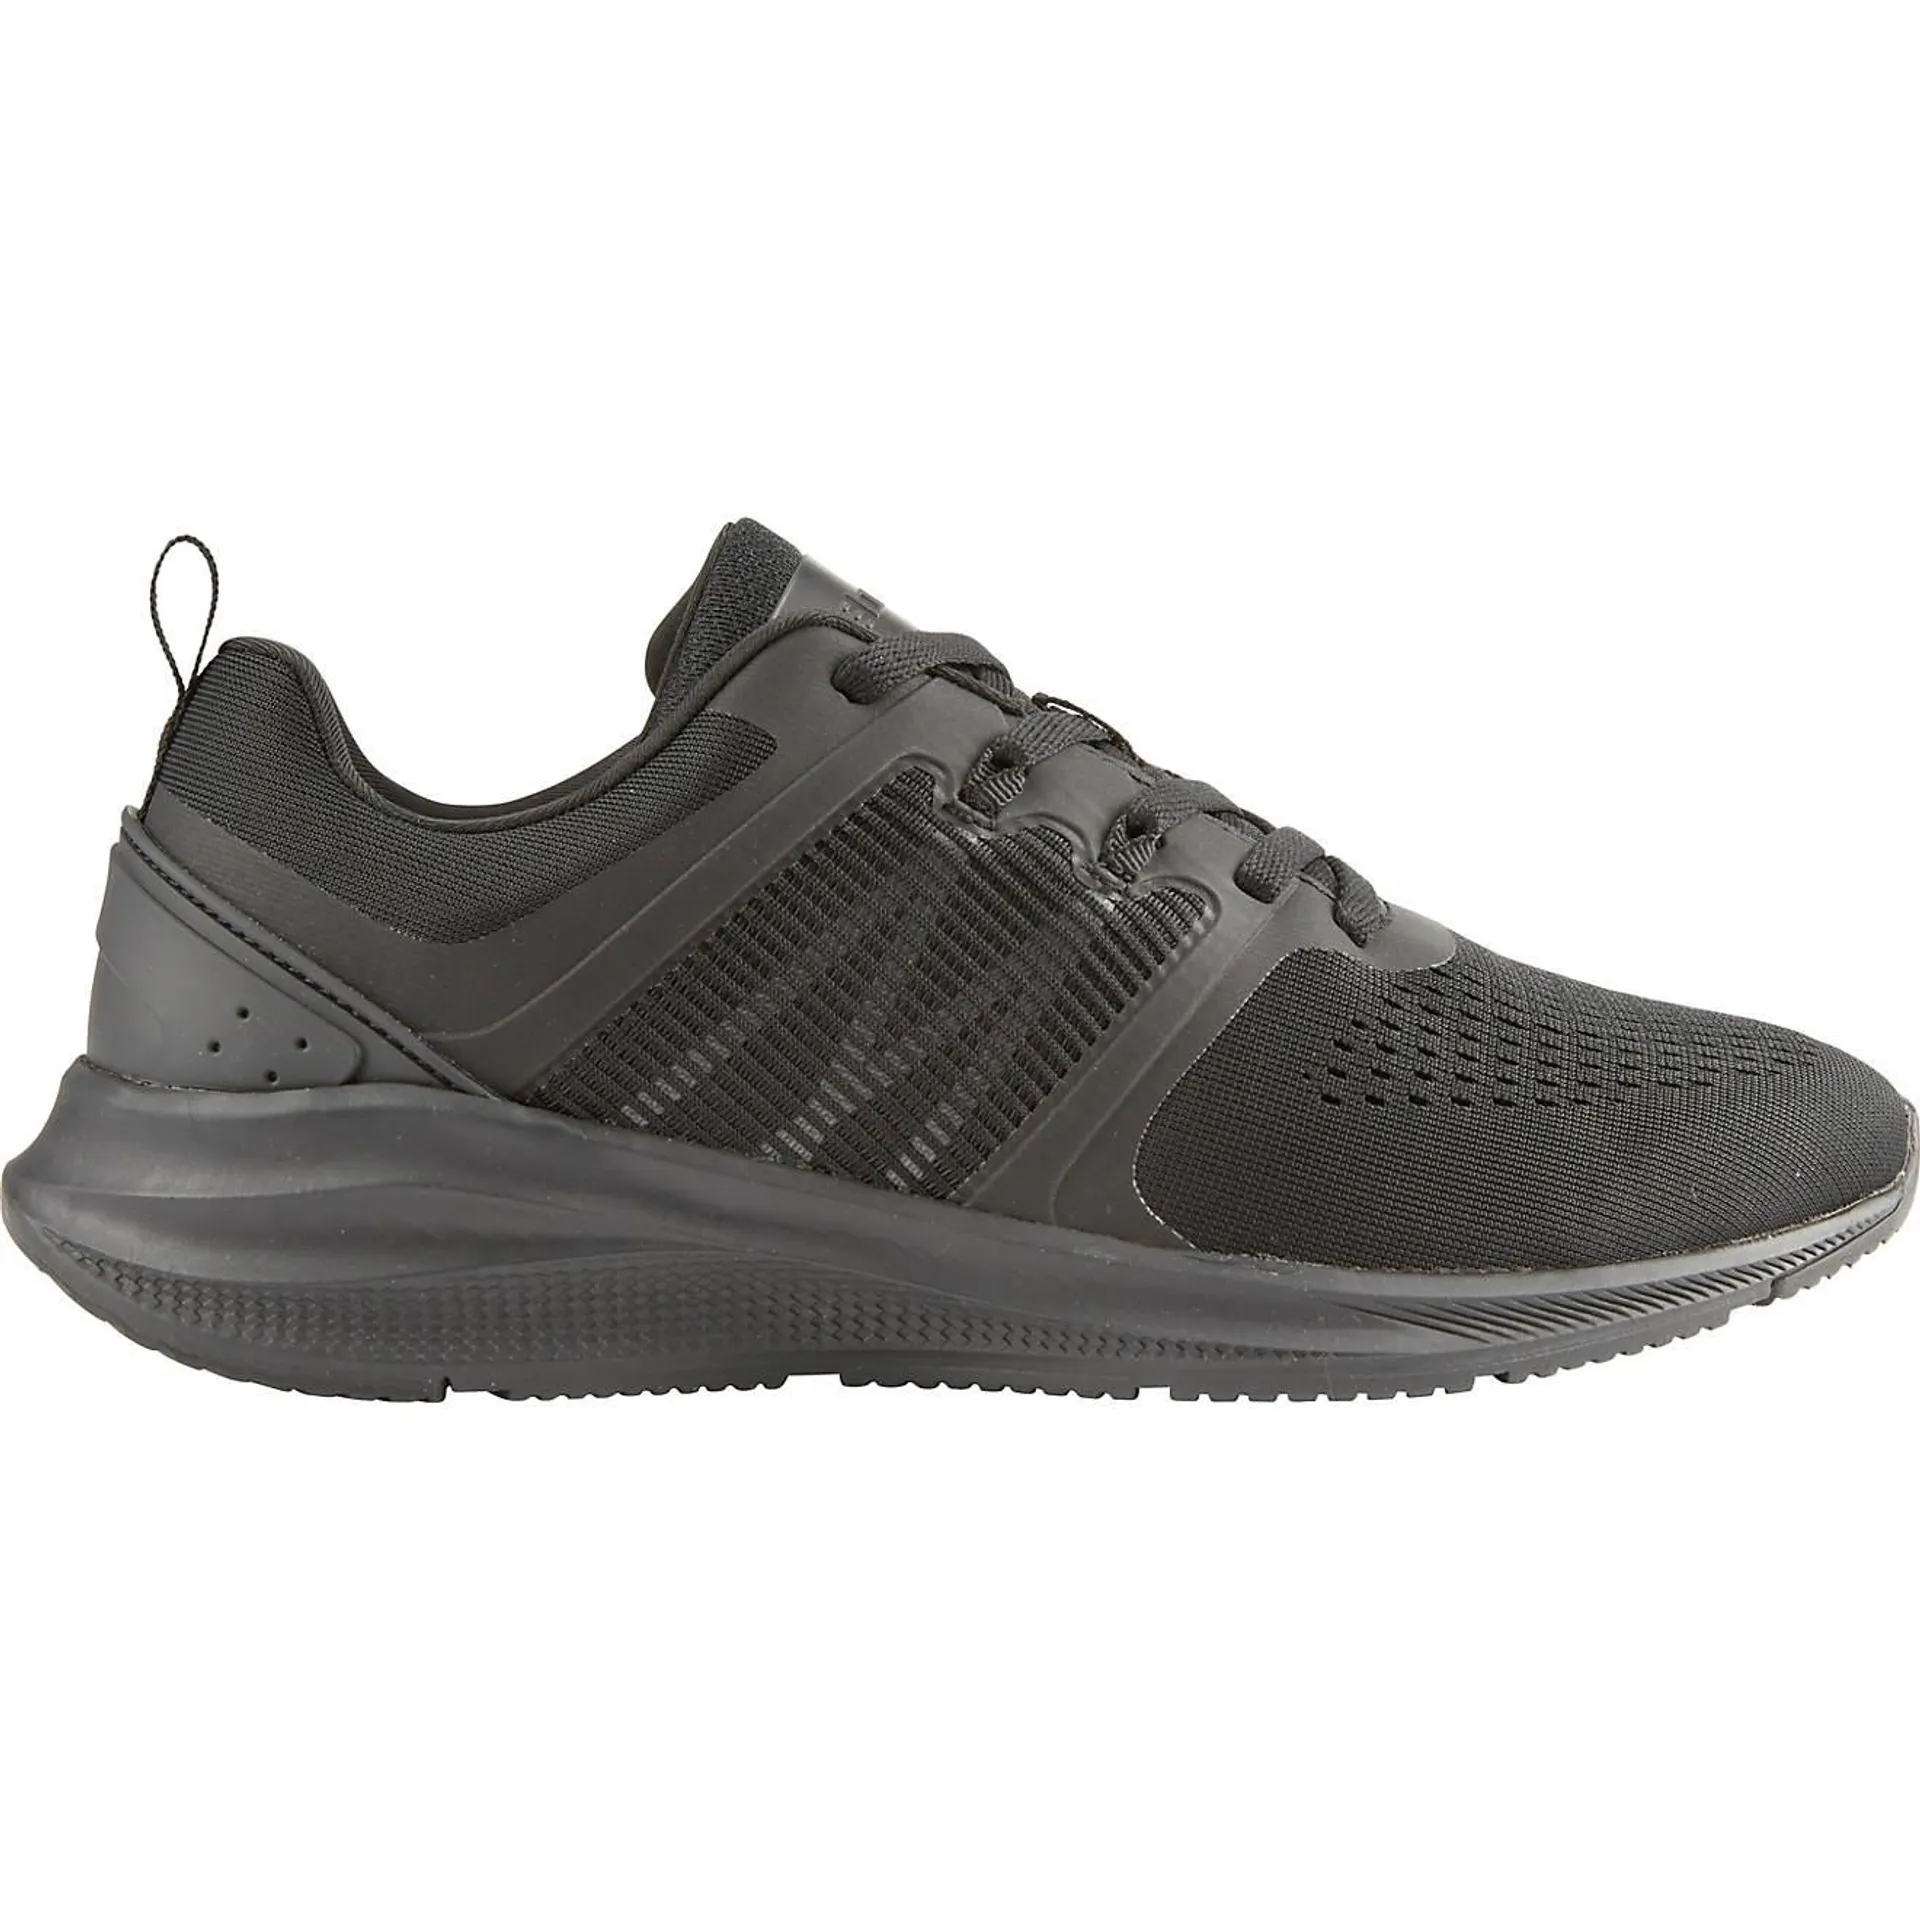 BCG Men's Outracer Training Shoes